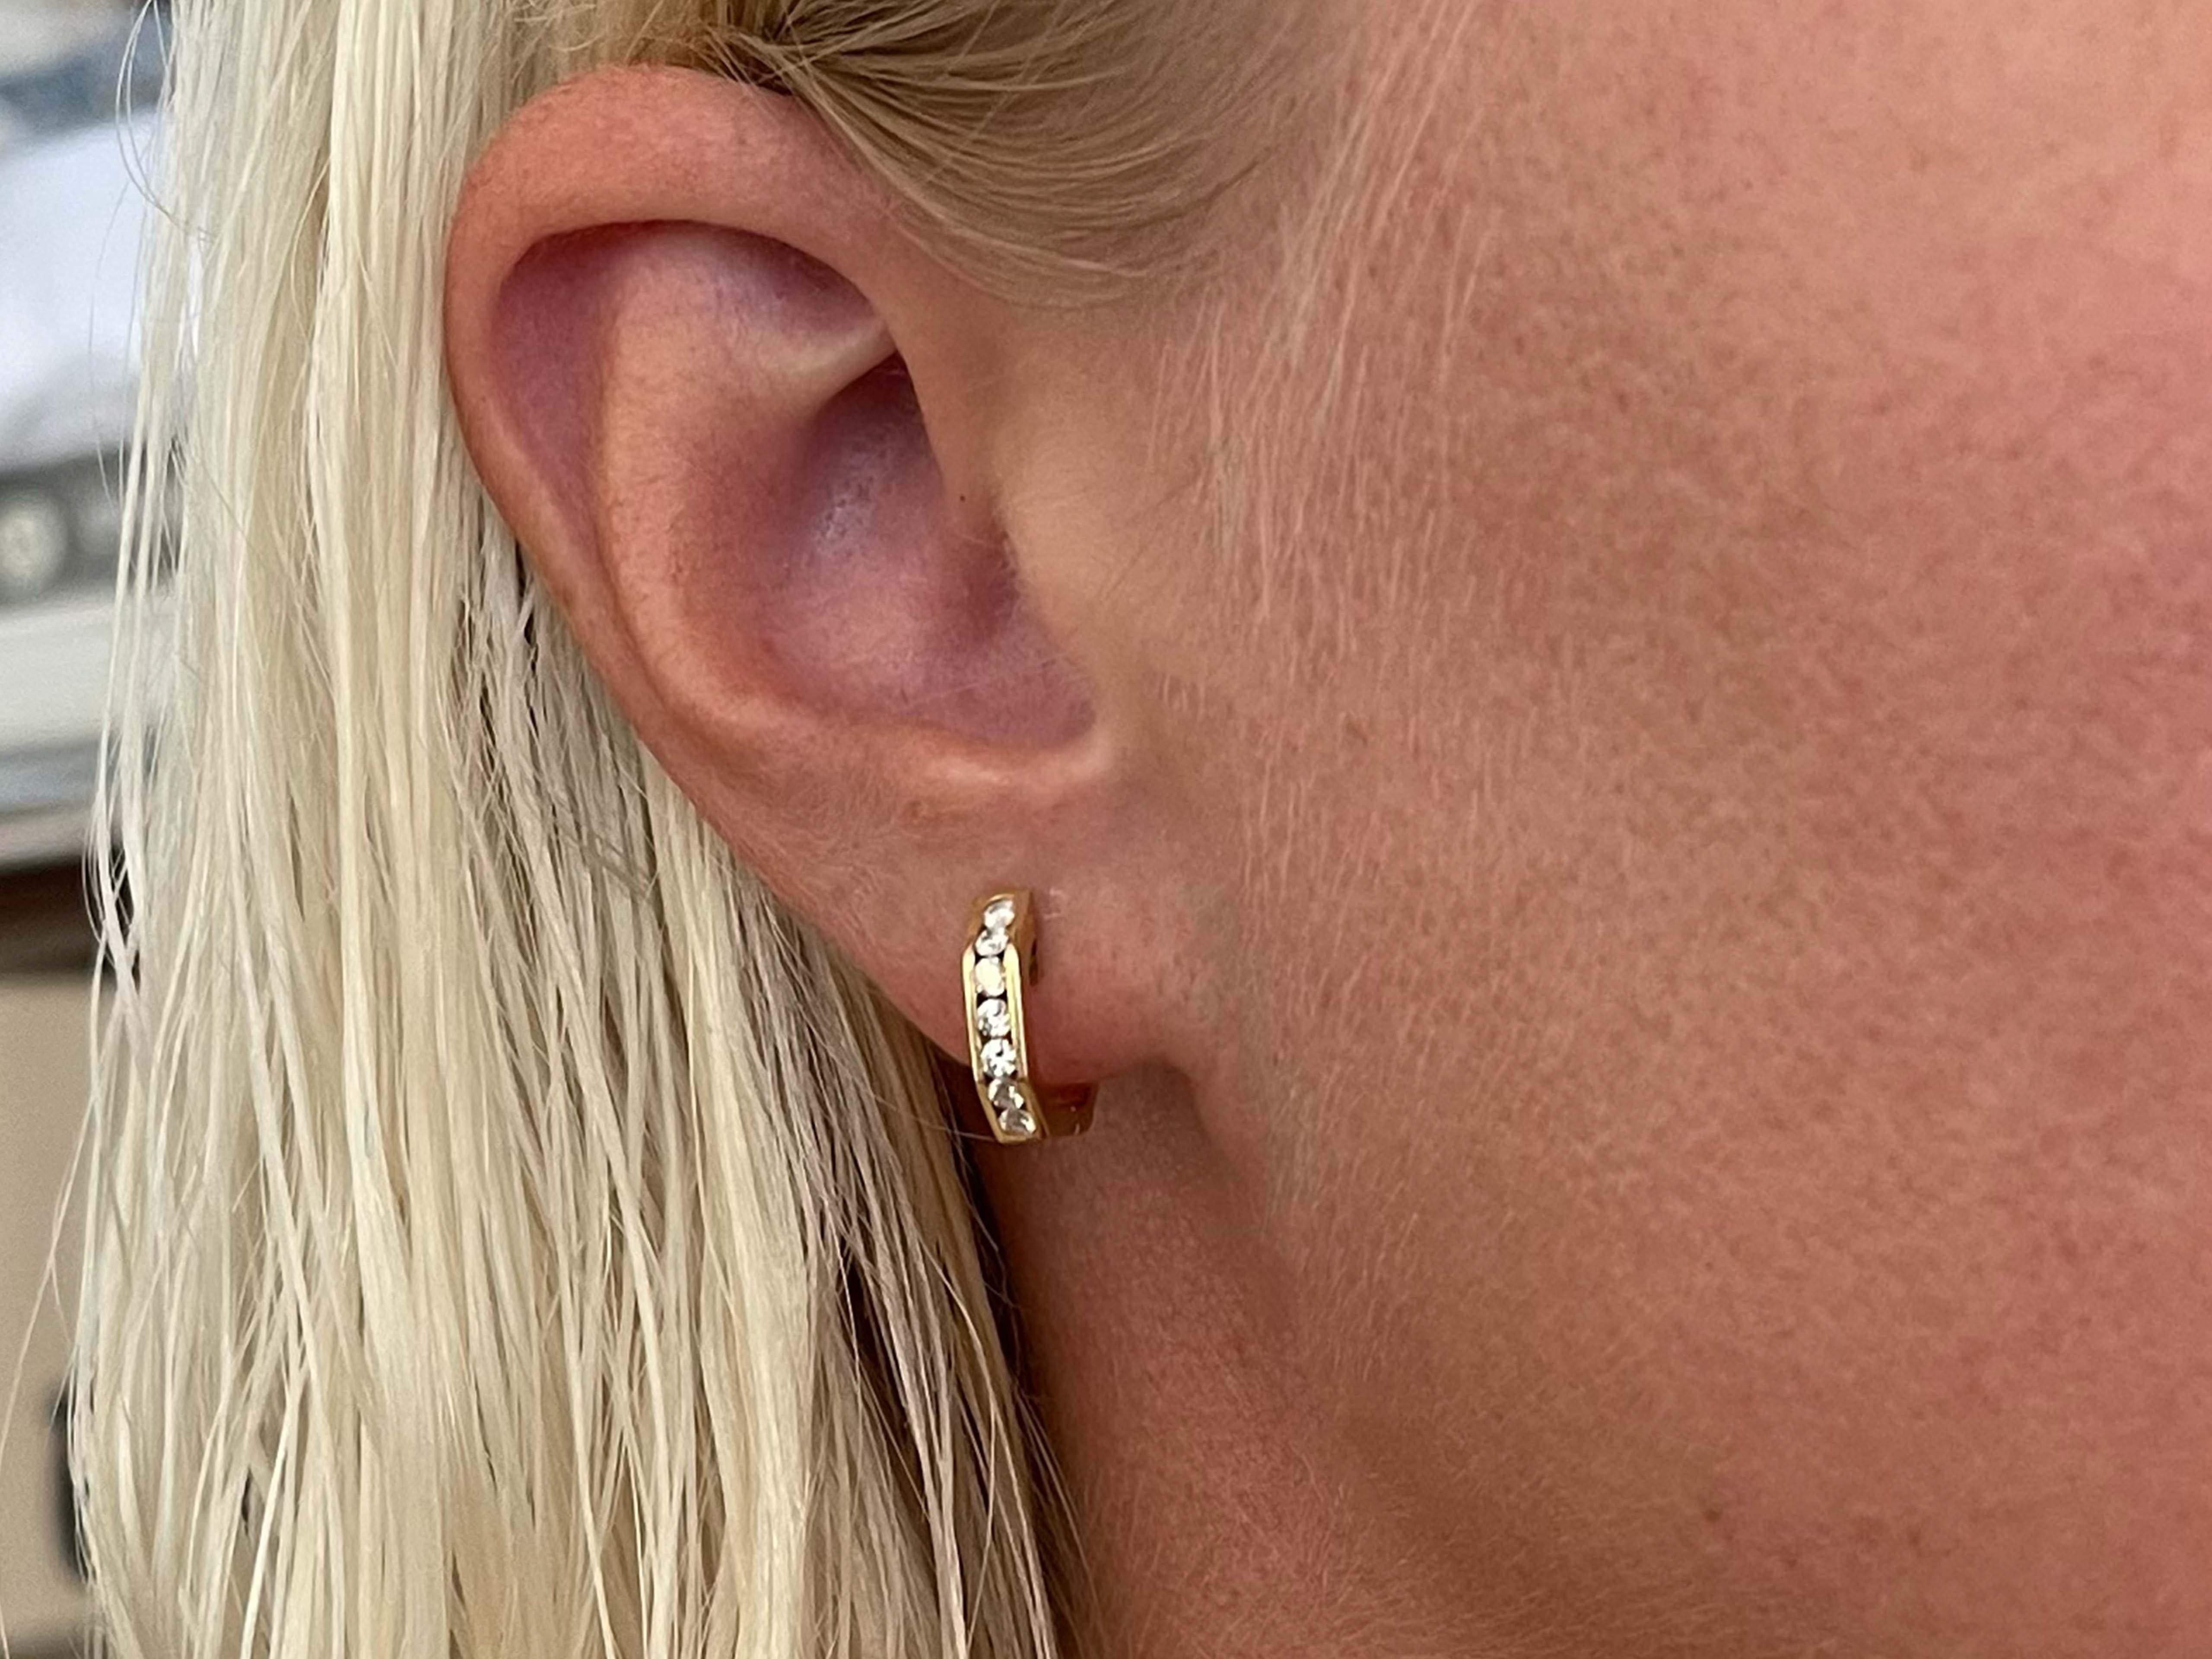 Earrings Specifications:

Metal: 14k Yellow Gold

Earring Diameter: 13 mm

Total Weight: 6.2 Grams

Diamonds: 14

Setting: Channel

Diamond Color: G-H

Diamond Clarity: SI

Diamond Carat Weight: 0.25 carats

Condition: Preowned